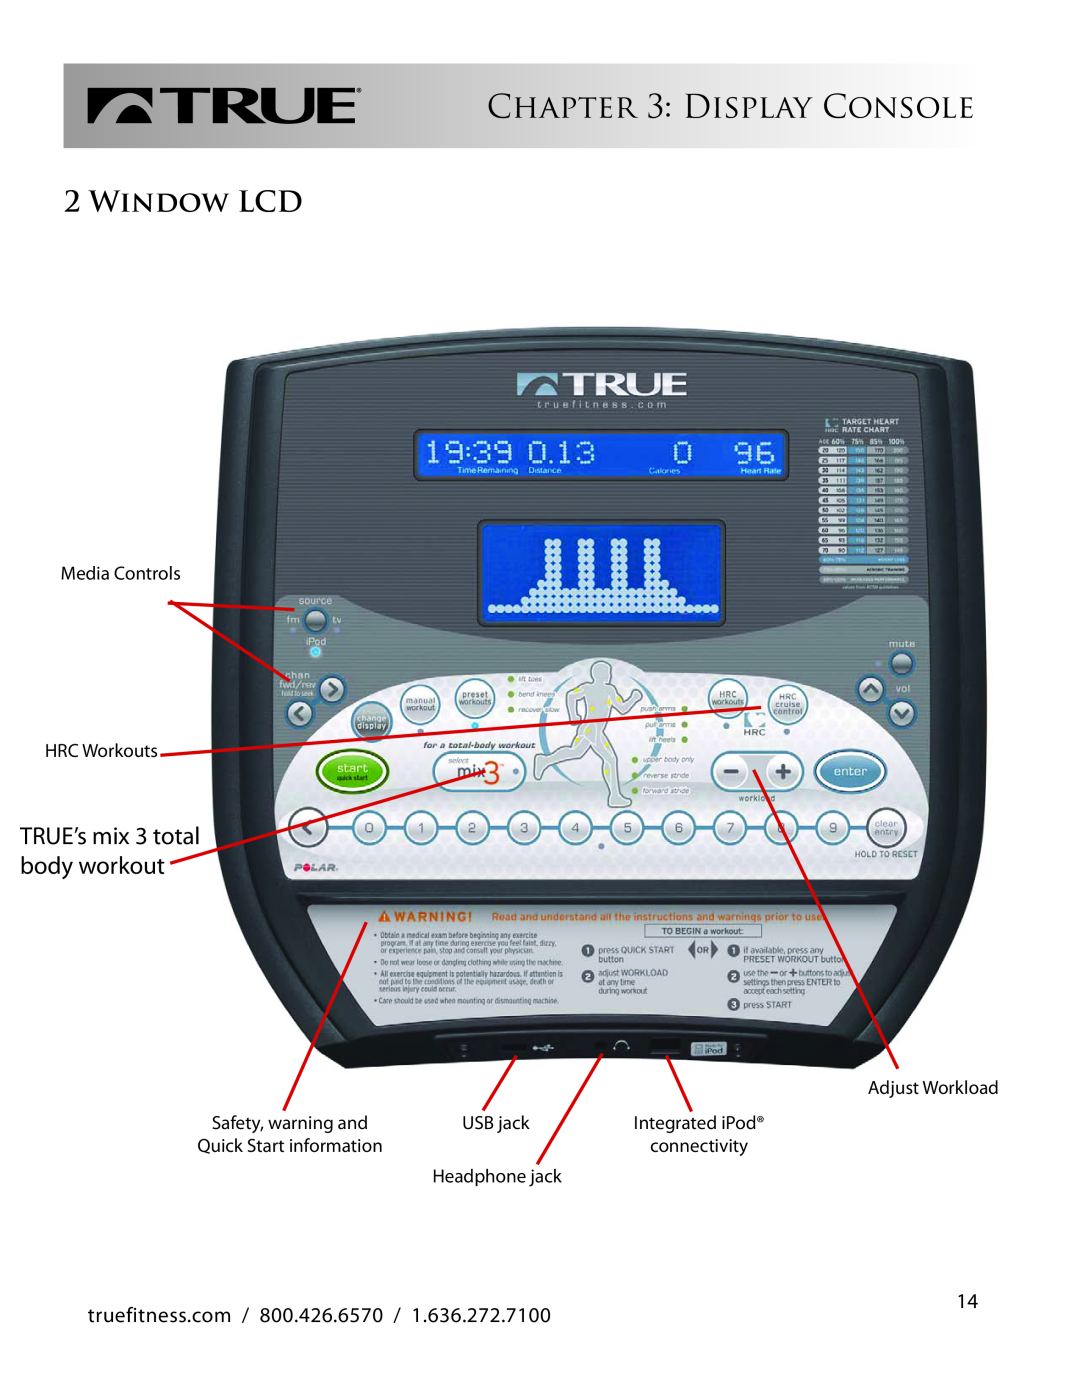 True Fitness CS800 Window Lcd, Display Console, Safety, warning and, Integrated iPod, Quick Start information, USB jack 